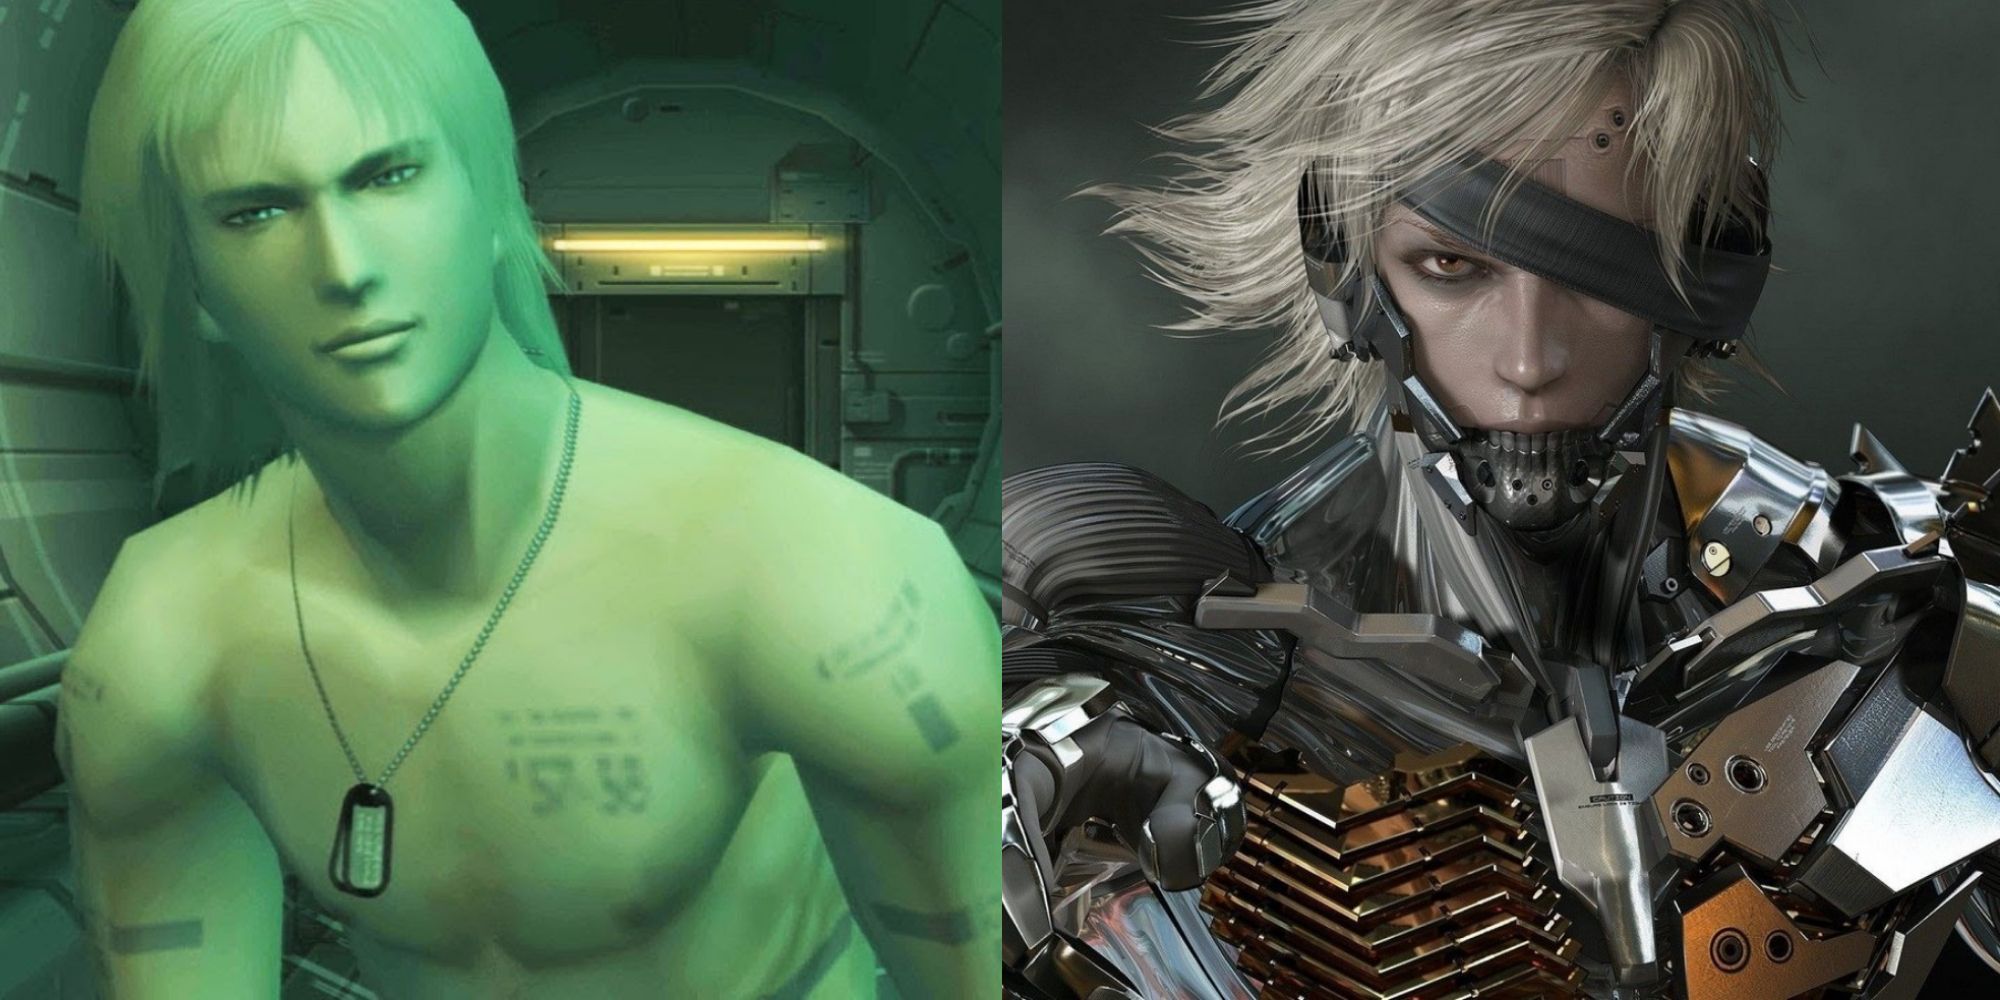 A comparison between Raiden's androgynous appearance in Metal Gear Solid 2: Sons of Liberty and his cyborg look from Metal Gear Solid 4: Guns of the Patriots and Metal Gear Rising: Revengeance